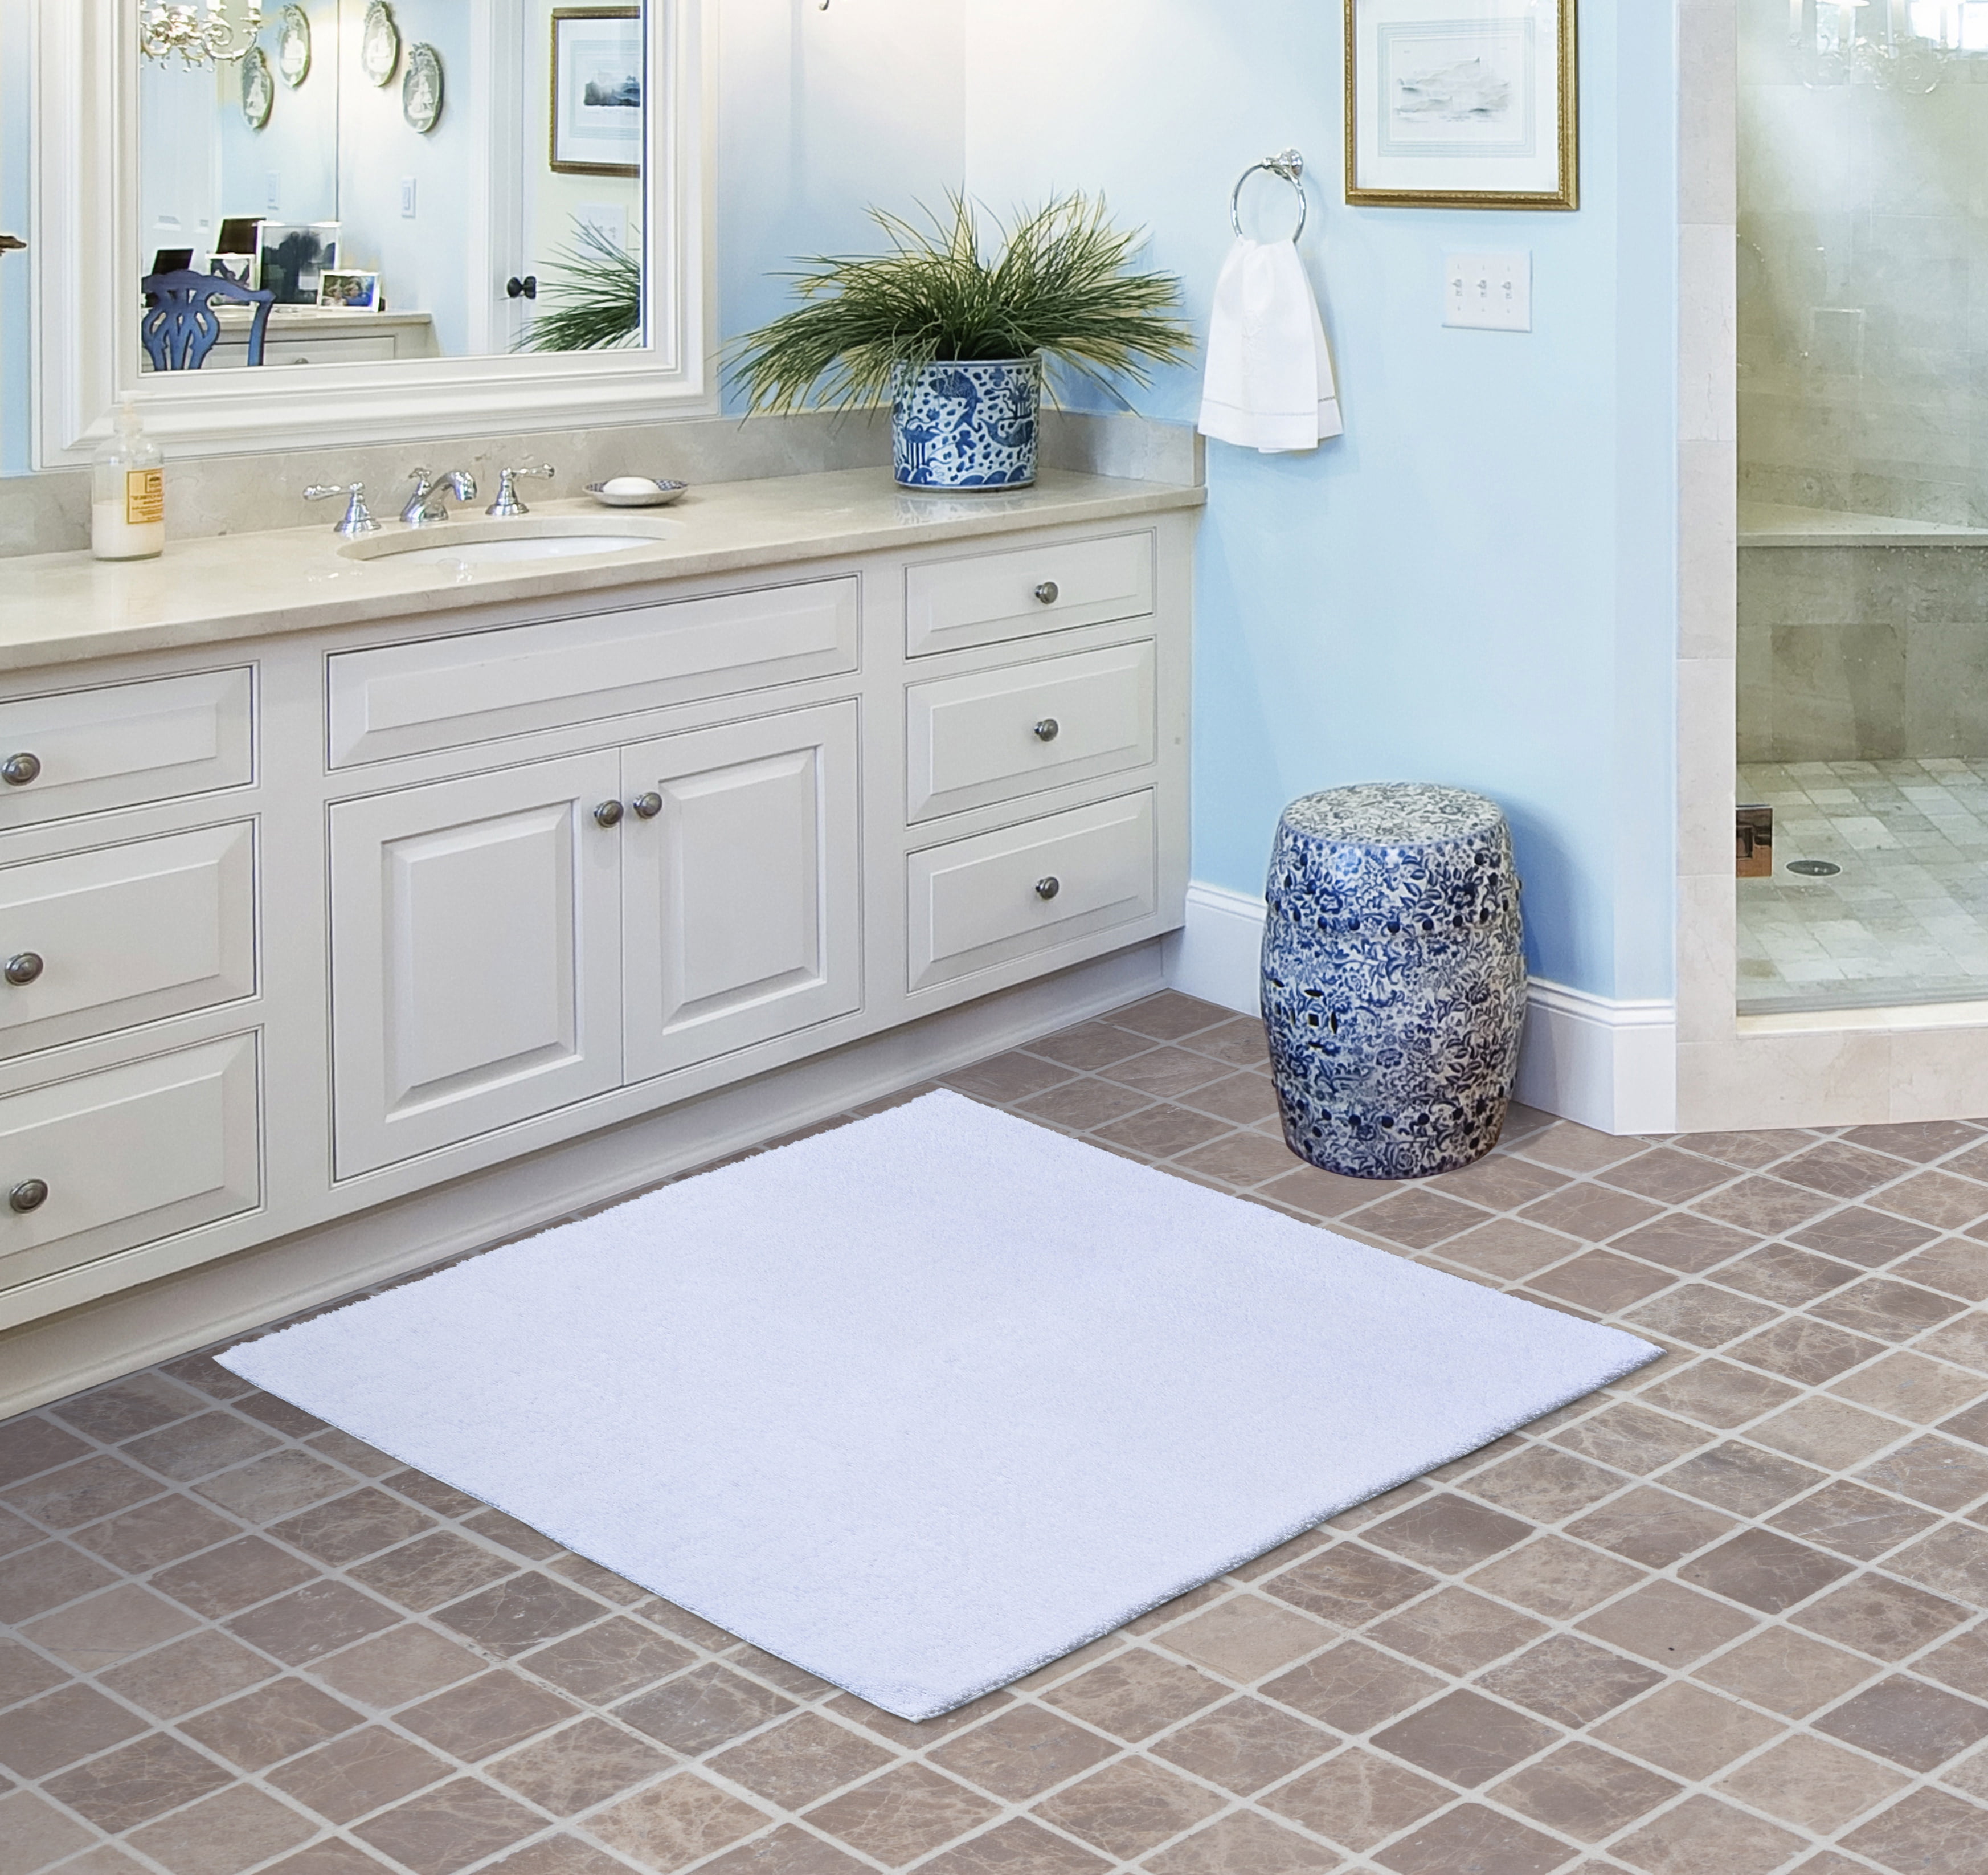 Garland Rug Queen Cotton Square, Washable Bathroom Rugs